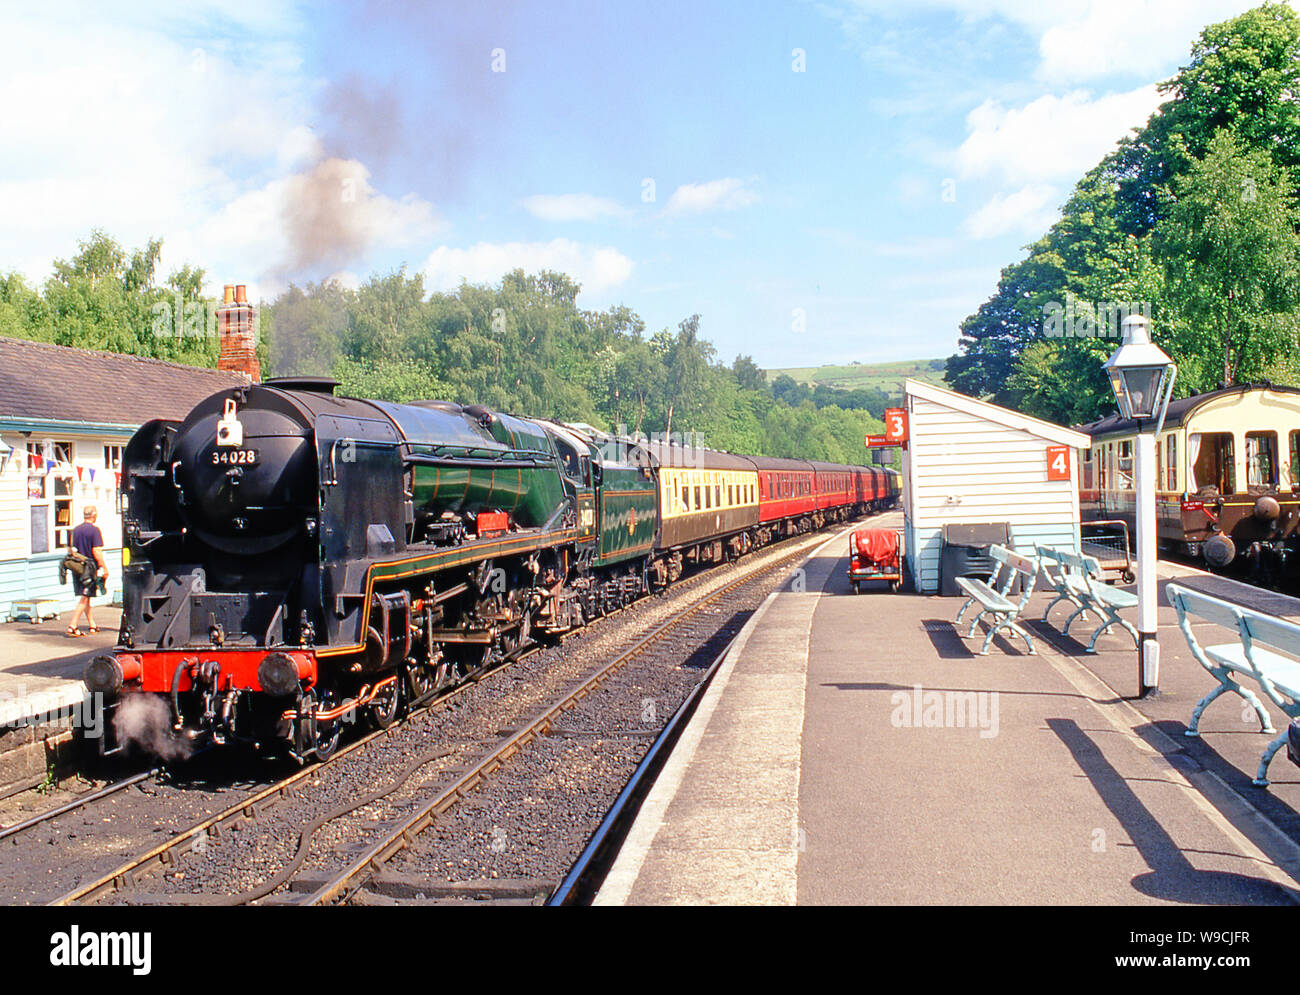 West Country Class Pacific No 34028 Eddystone at Grosmont, North Yorkshire Moors Railway, England Stock Photo